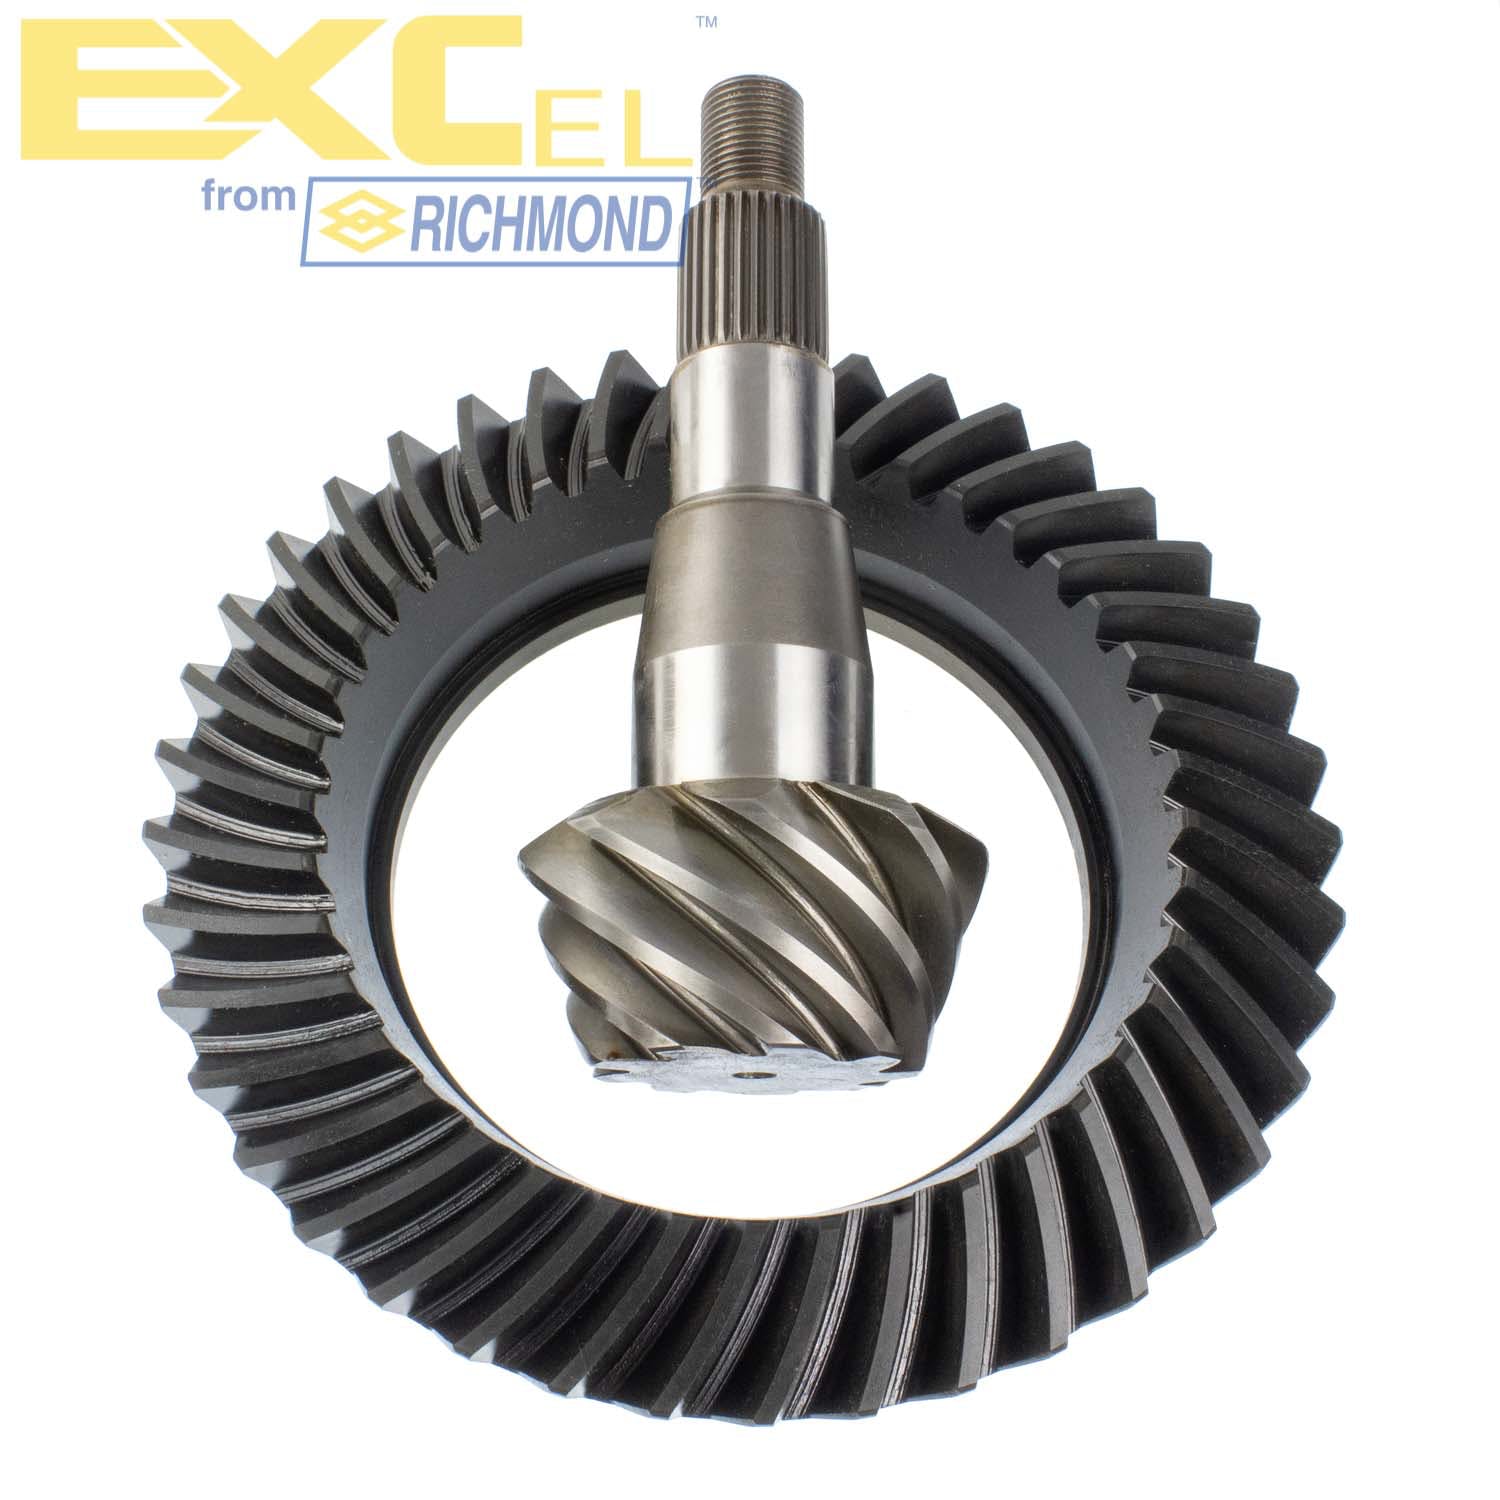 Excel CR925456 Differential Ring and Pinion